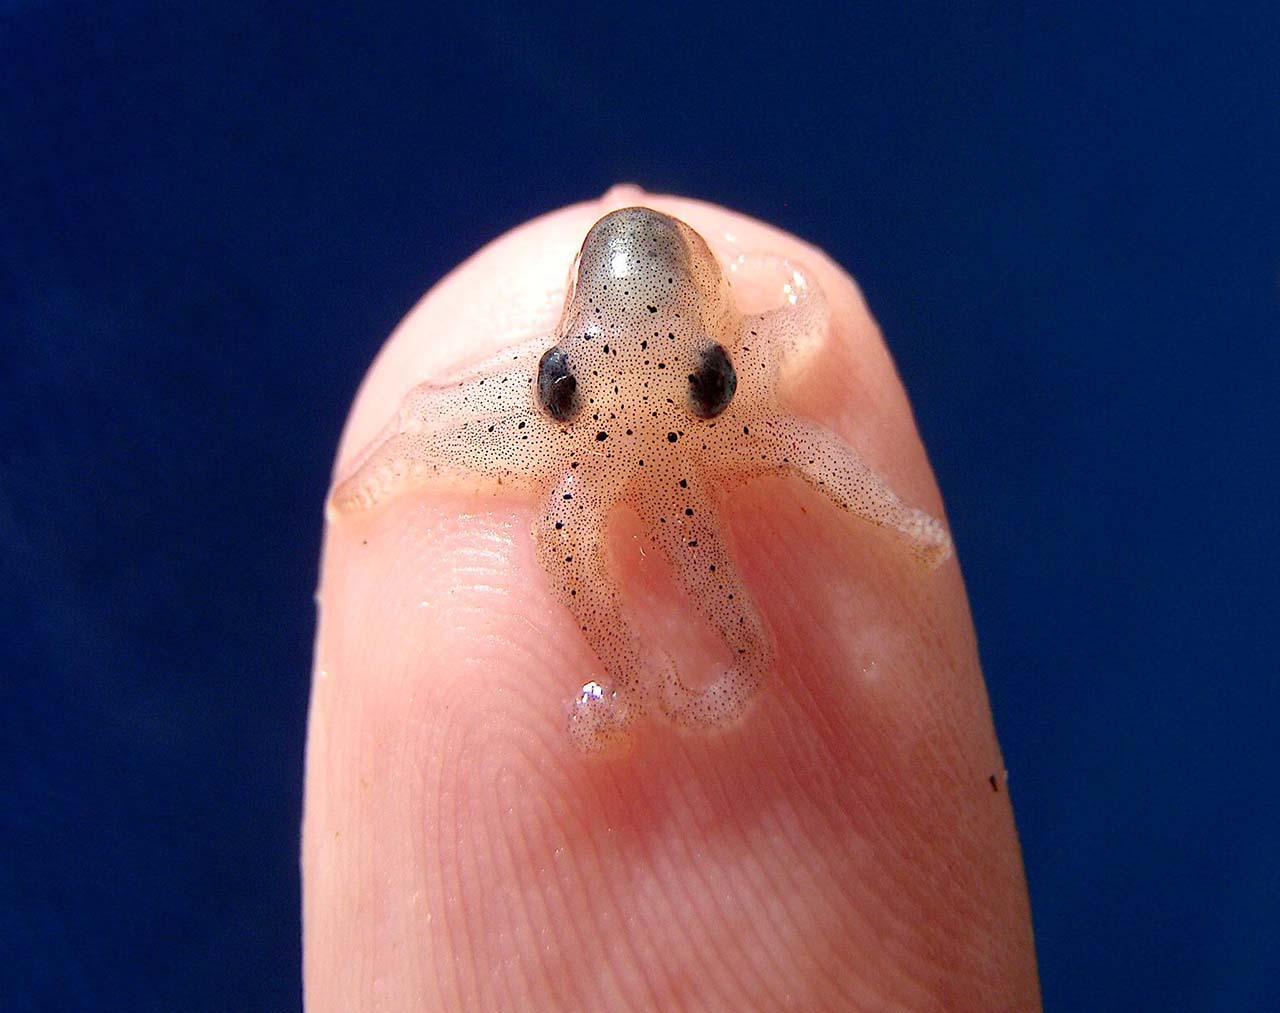 27 Adorable & Tiny Animals That Are Too Cute To Handle #18: Octopus